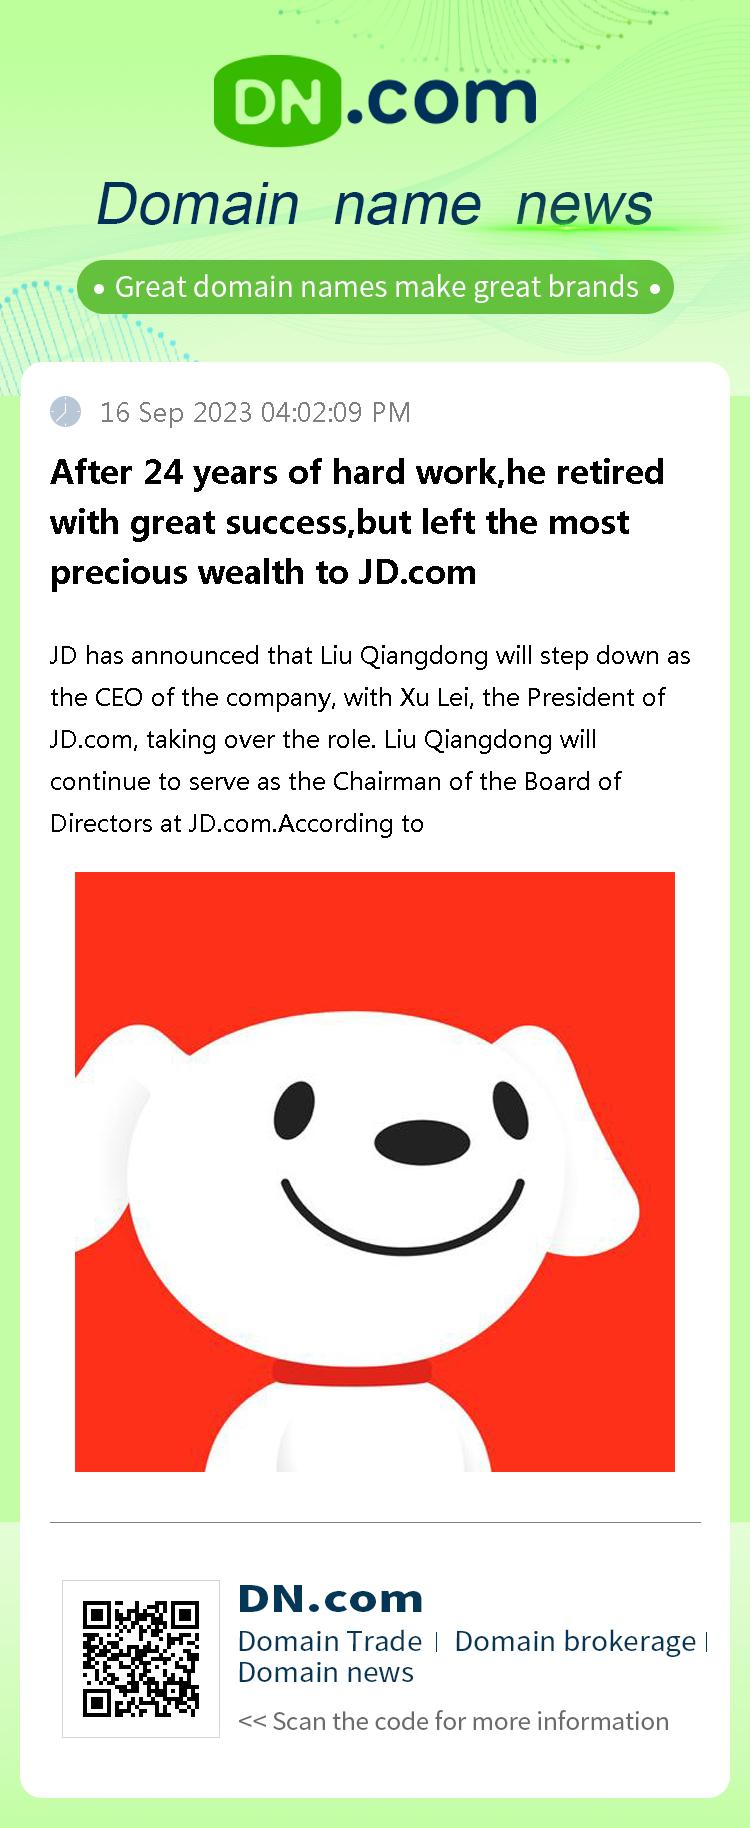 After 24 years of hard work,he retired with great success,but left the most precious wealth to JD.com